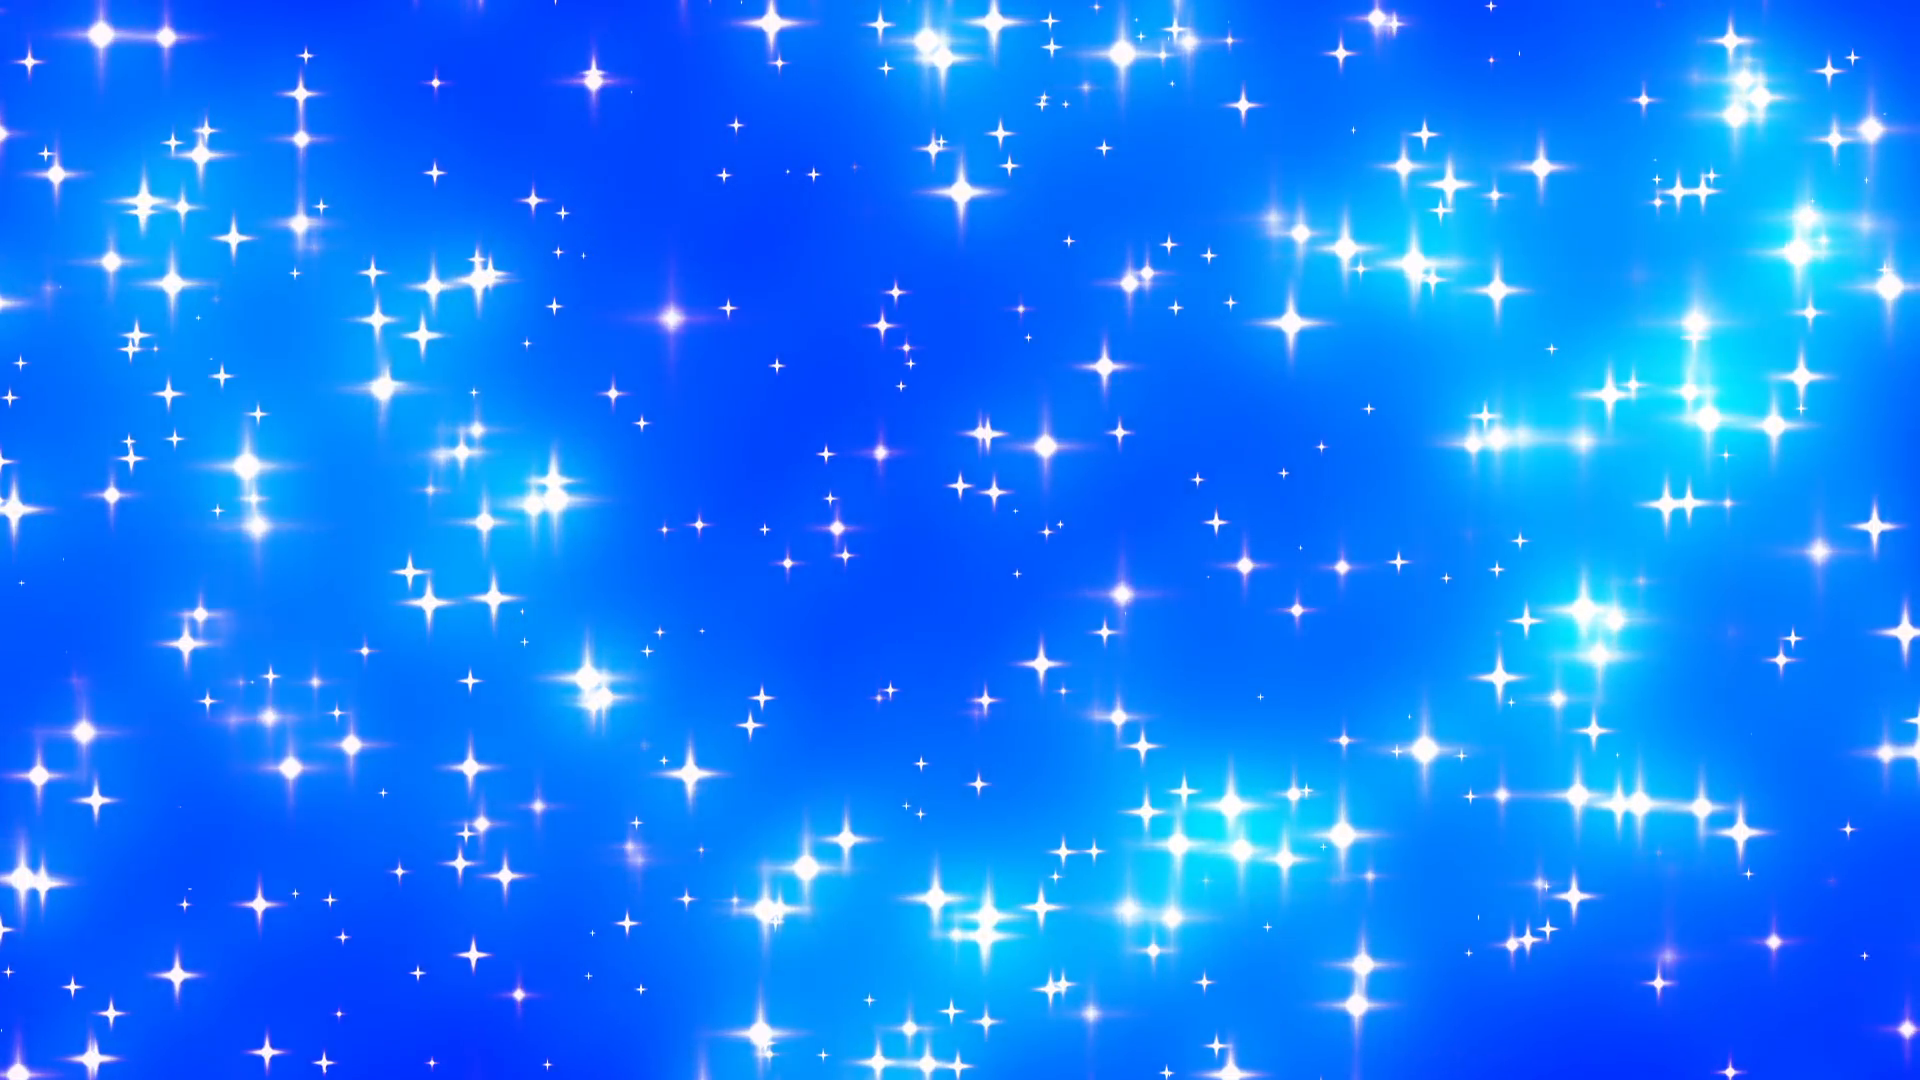 Free download Blue Glowing Stars Background Loop 2 Den PNG Image PNGio [1920x1080] for your Desktop, Mobile & Tablet. Explore Background Loops. Background Loops